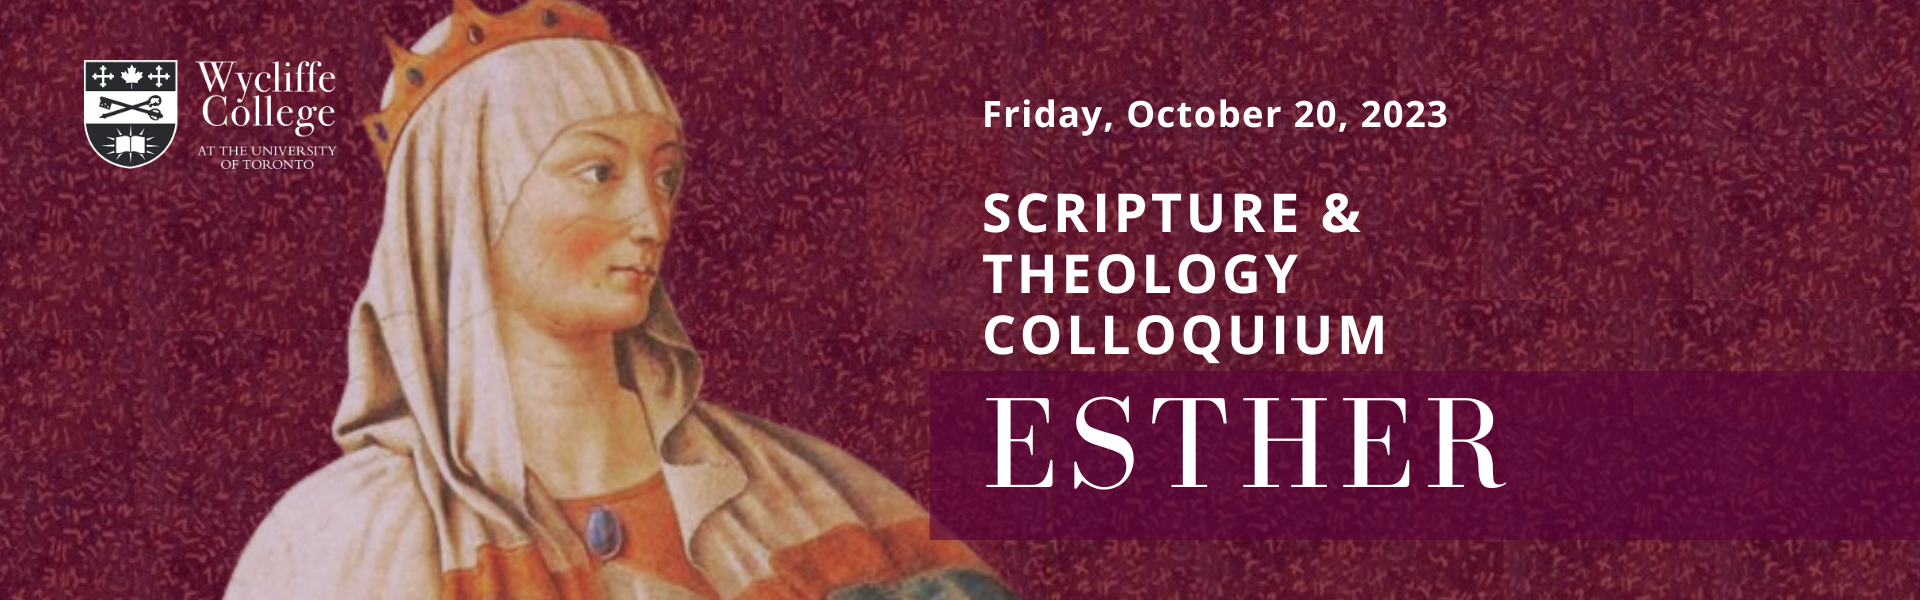 The book of Esther - Fall 2023 Scripture and Theology Colloquium